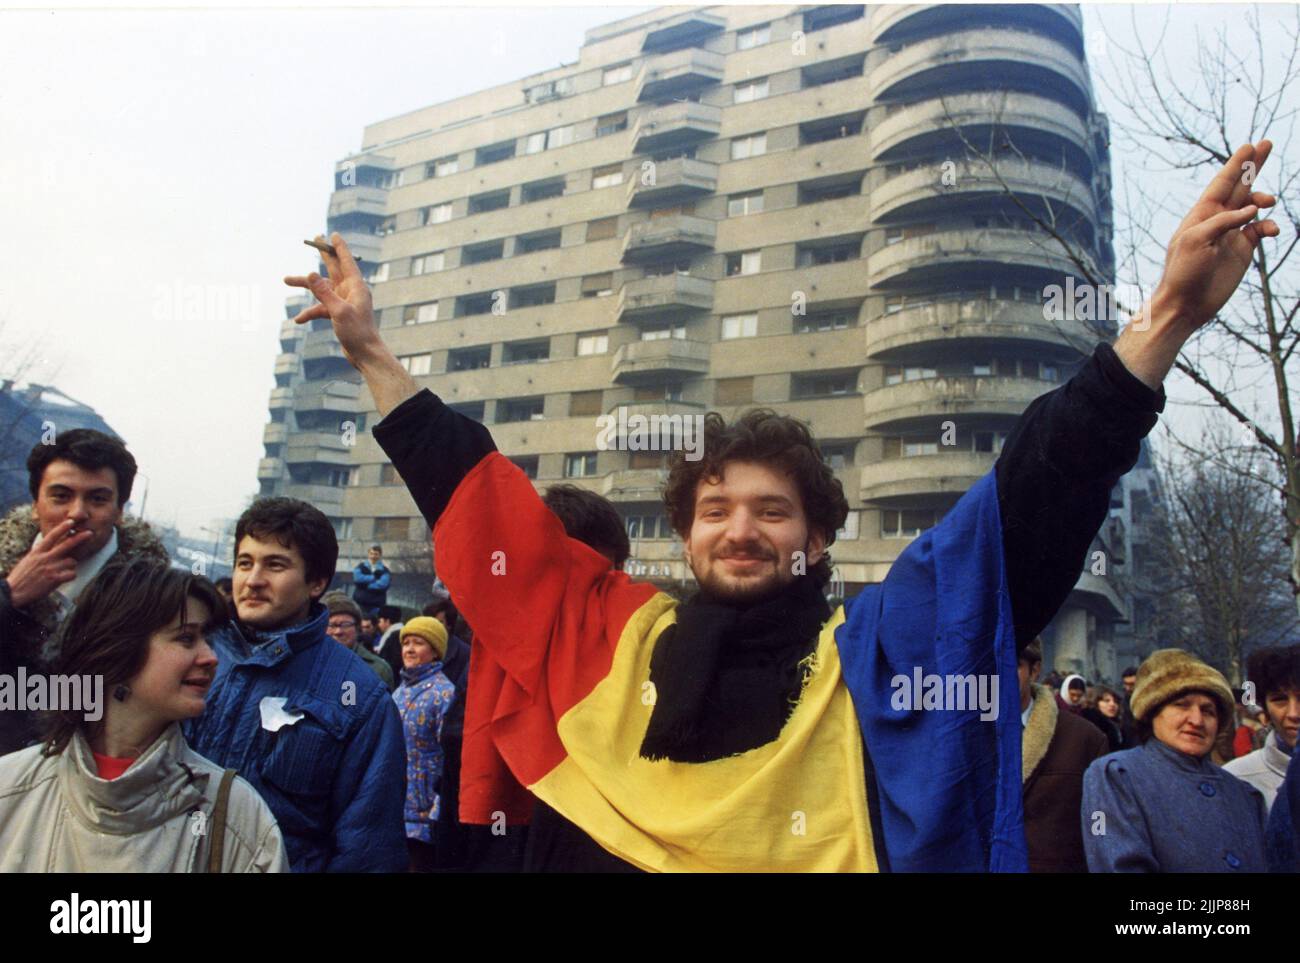 Bucharest, Romania, January 1990. After the anti-communist revolution of December 1989, people would gather daily in the University Square to protest the new people in power, who were the former communist officials.  A young man makes the victory sign, wearing the national flag with the socialist emblem cut off, a symbol during the revolution, representing the end of the communist era. Stock Photo